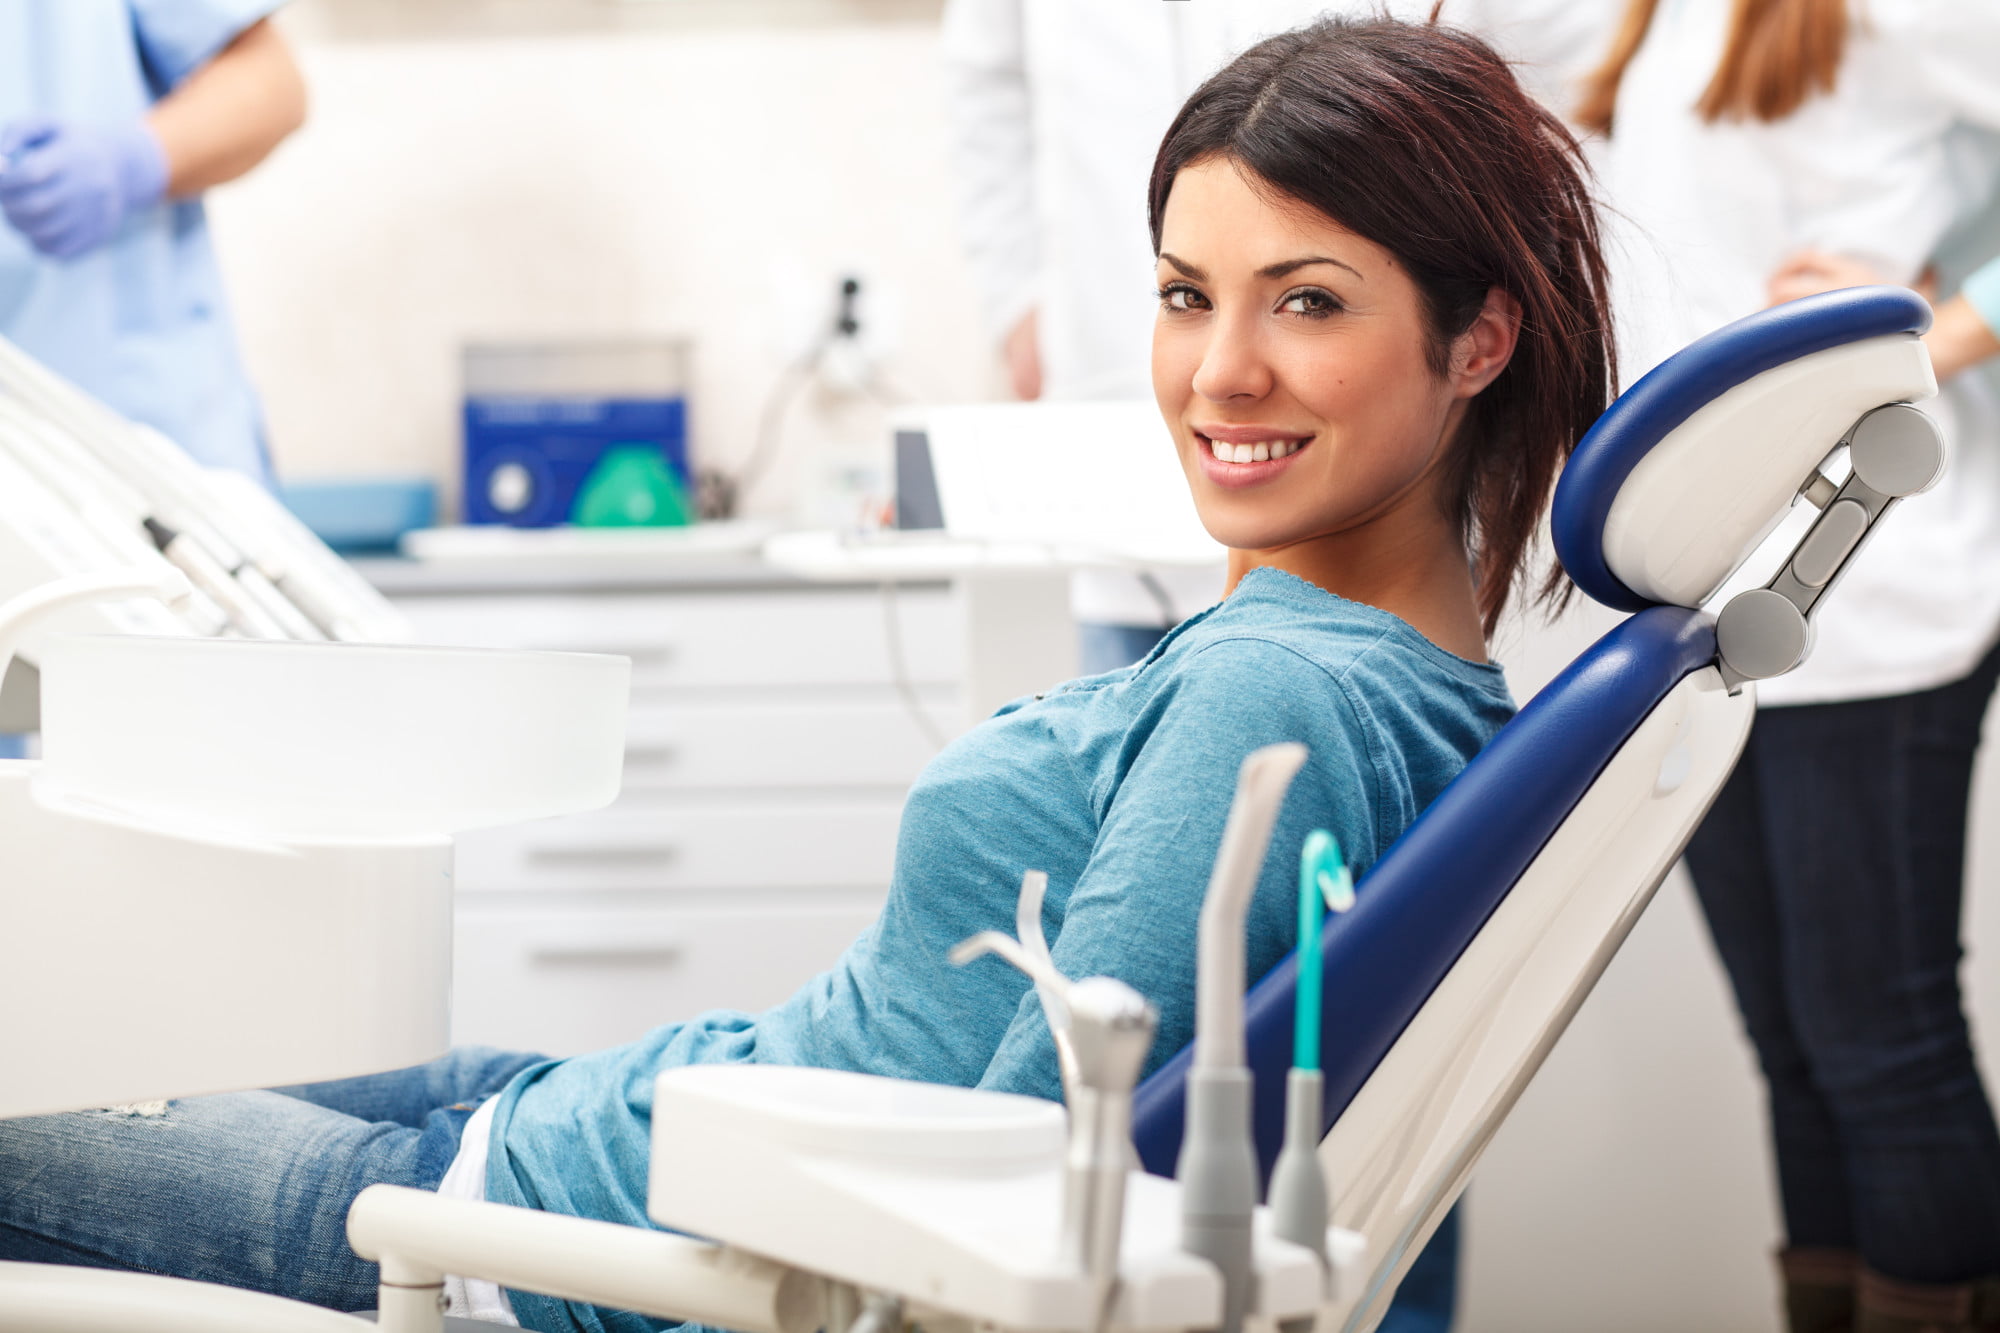 Finding the right cosmetic dentist in your area requires knowing your options. Here is what to consider when choosing a cosmetic dentistry service.